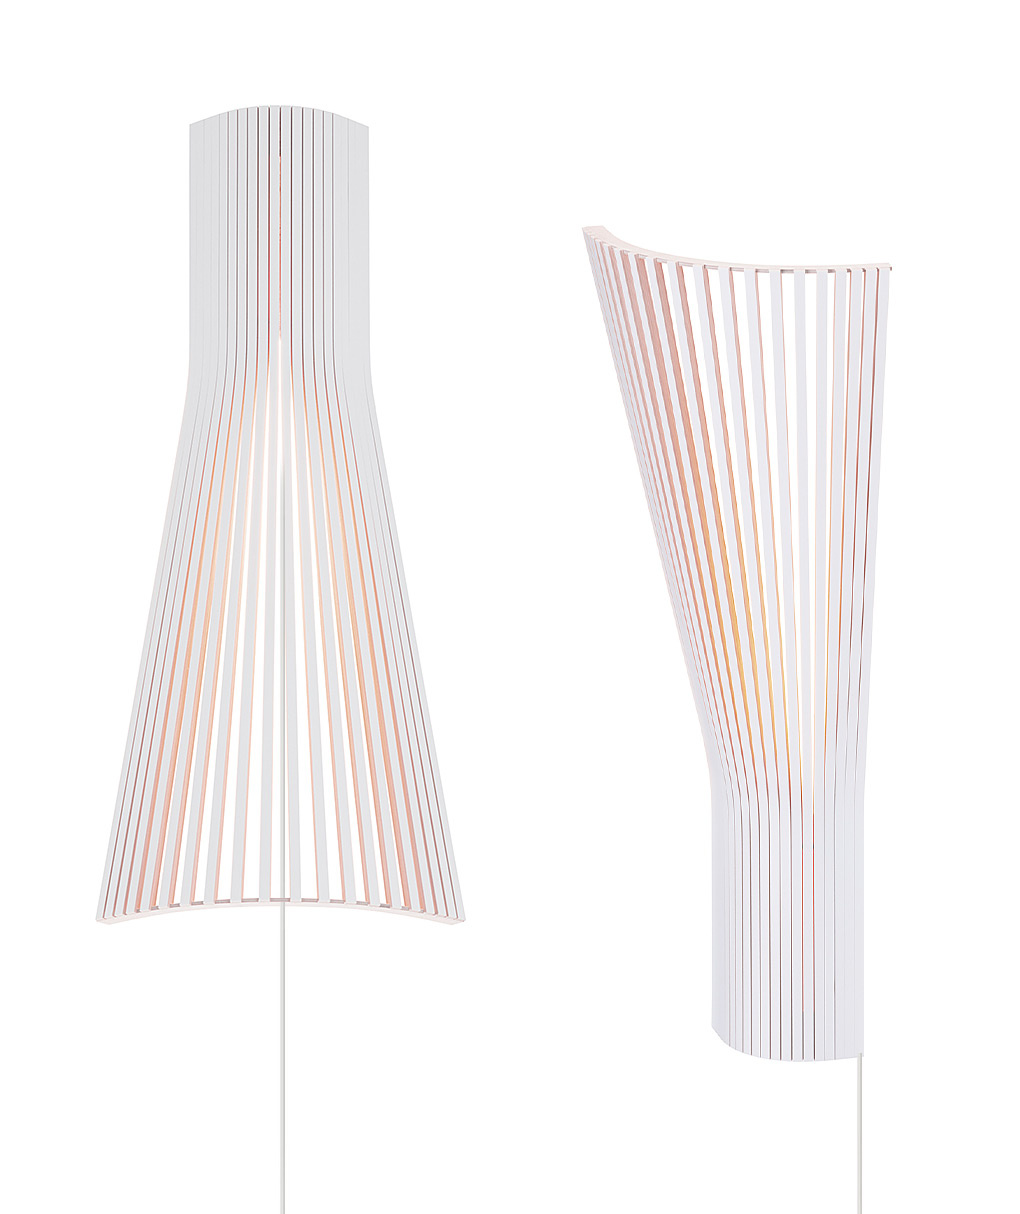 Secto 4236 corner lamp is available in white laminated